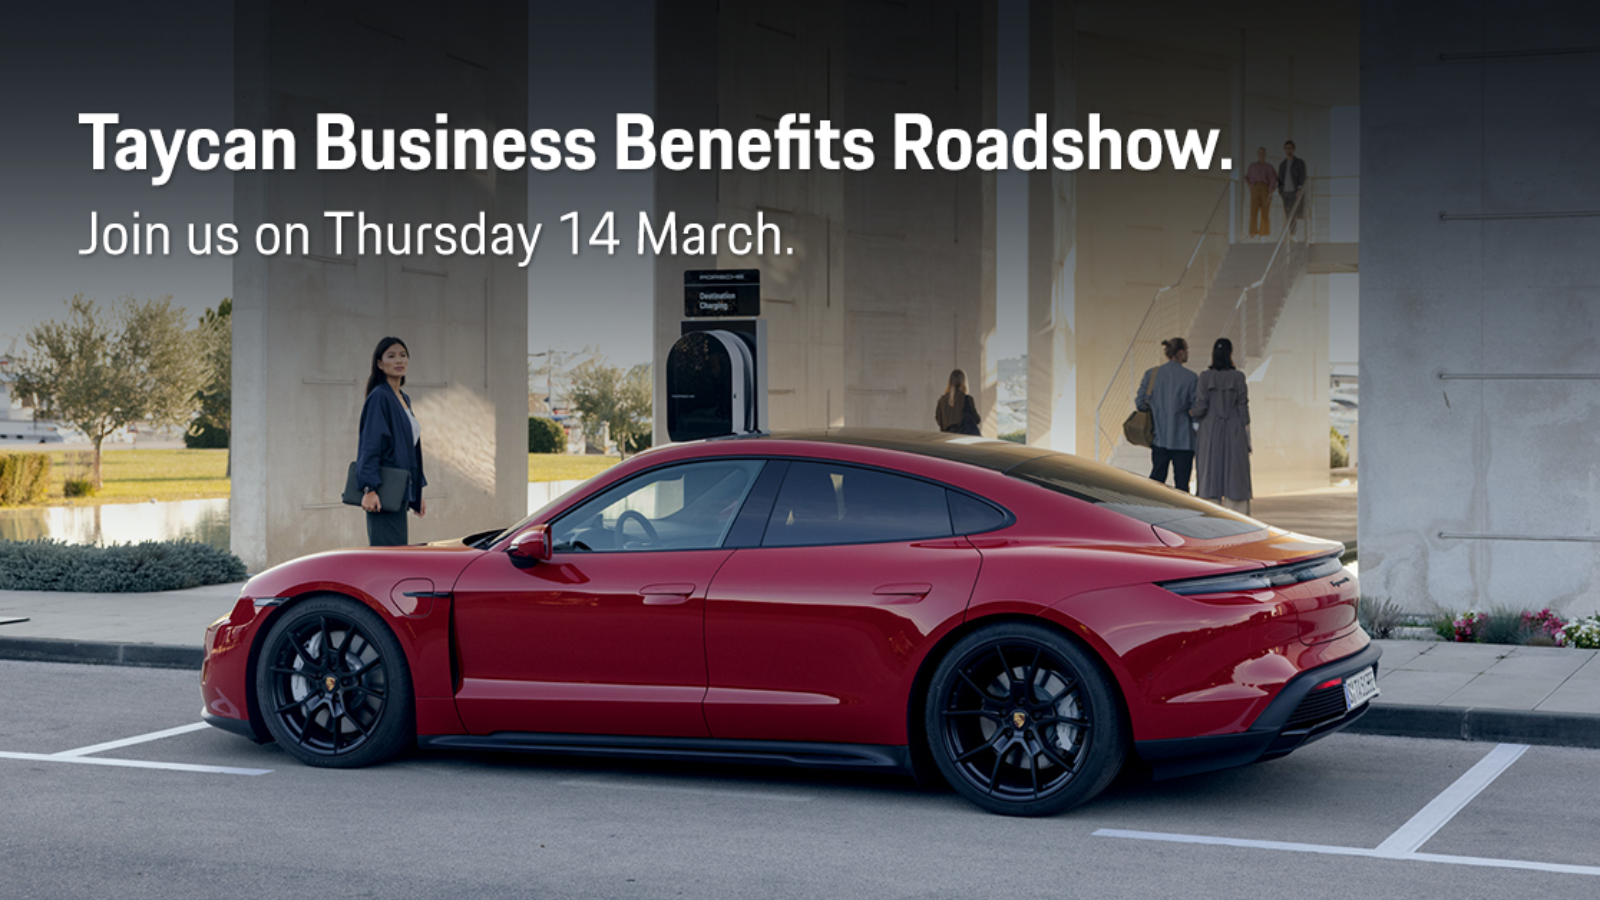 Discover the business benefits of the Porsche Taycan